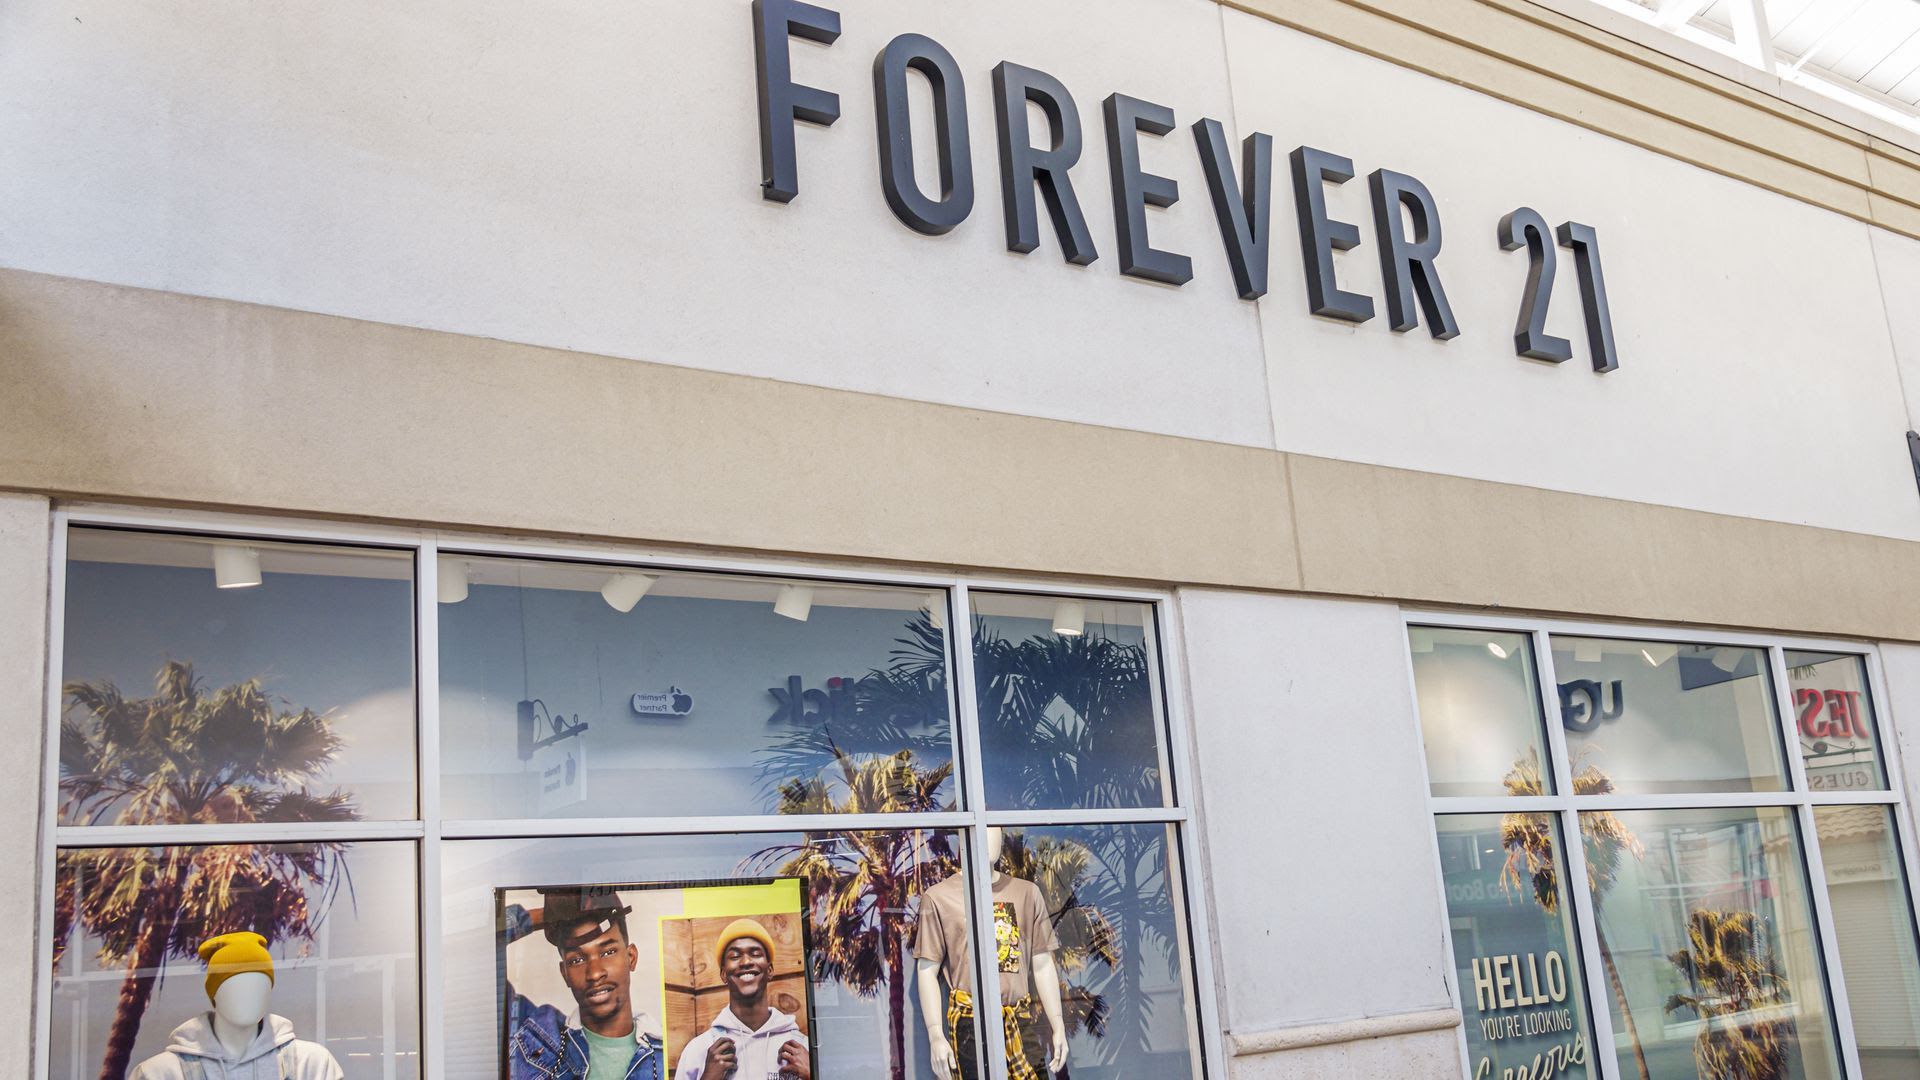 A Forever 21 storefront